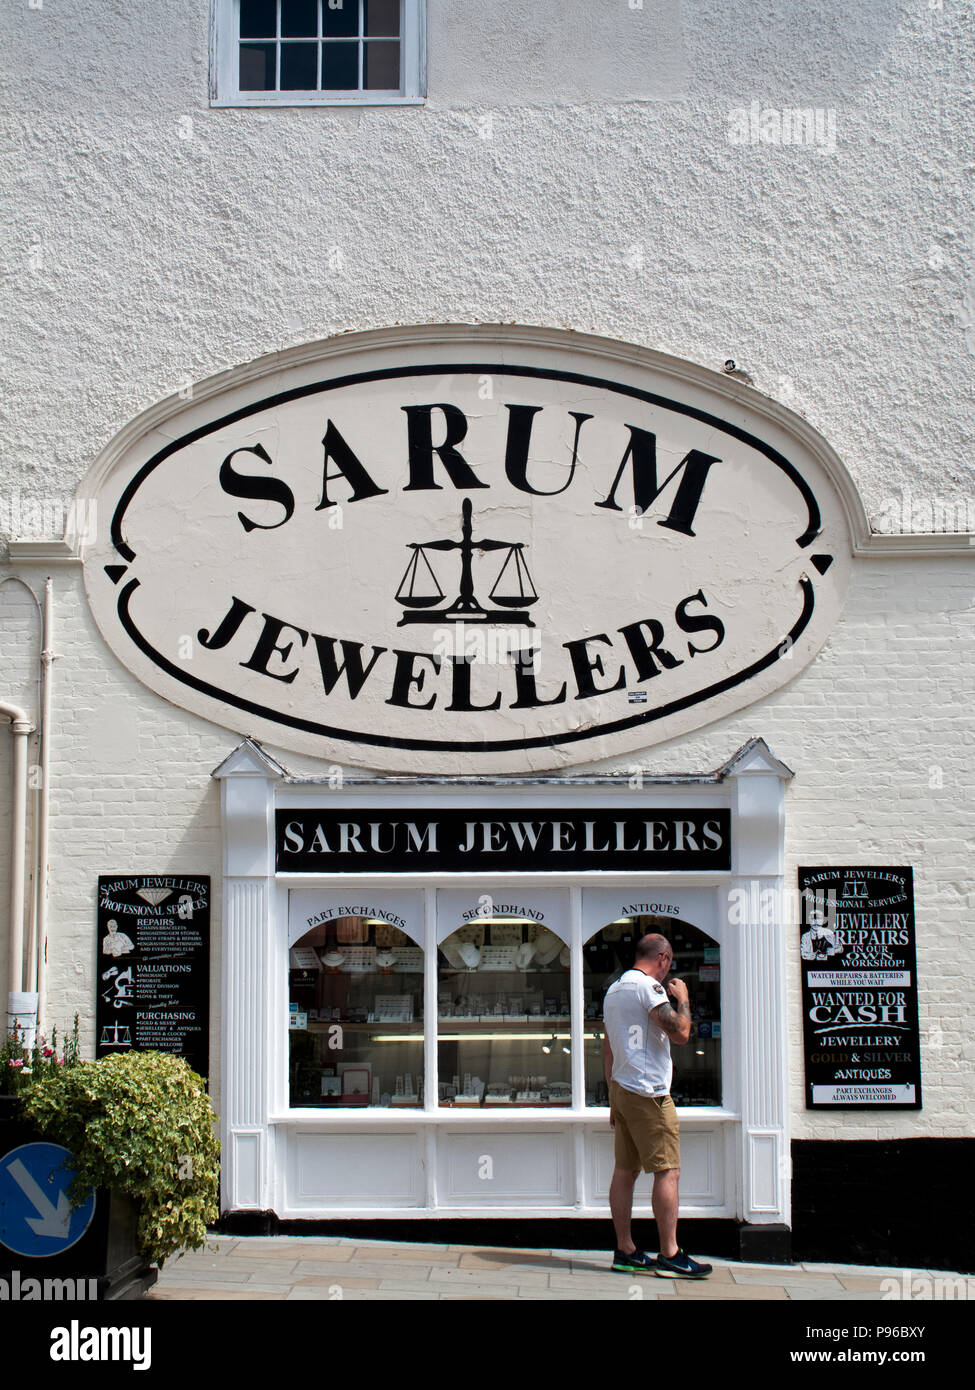 Sarum jewellers Professional Services, repairs in their own workshop advertising board Stock Photo